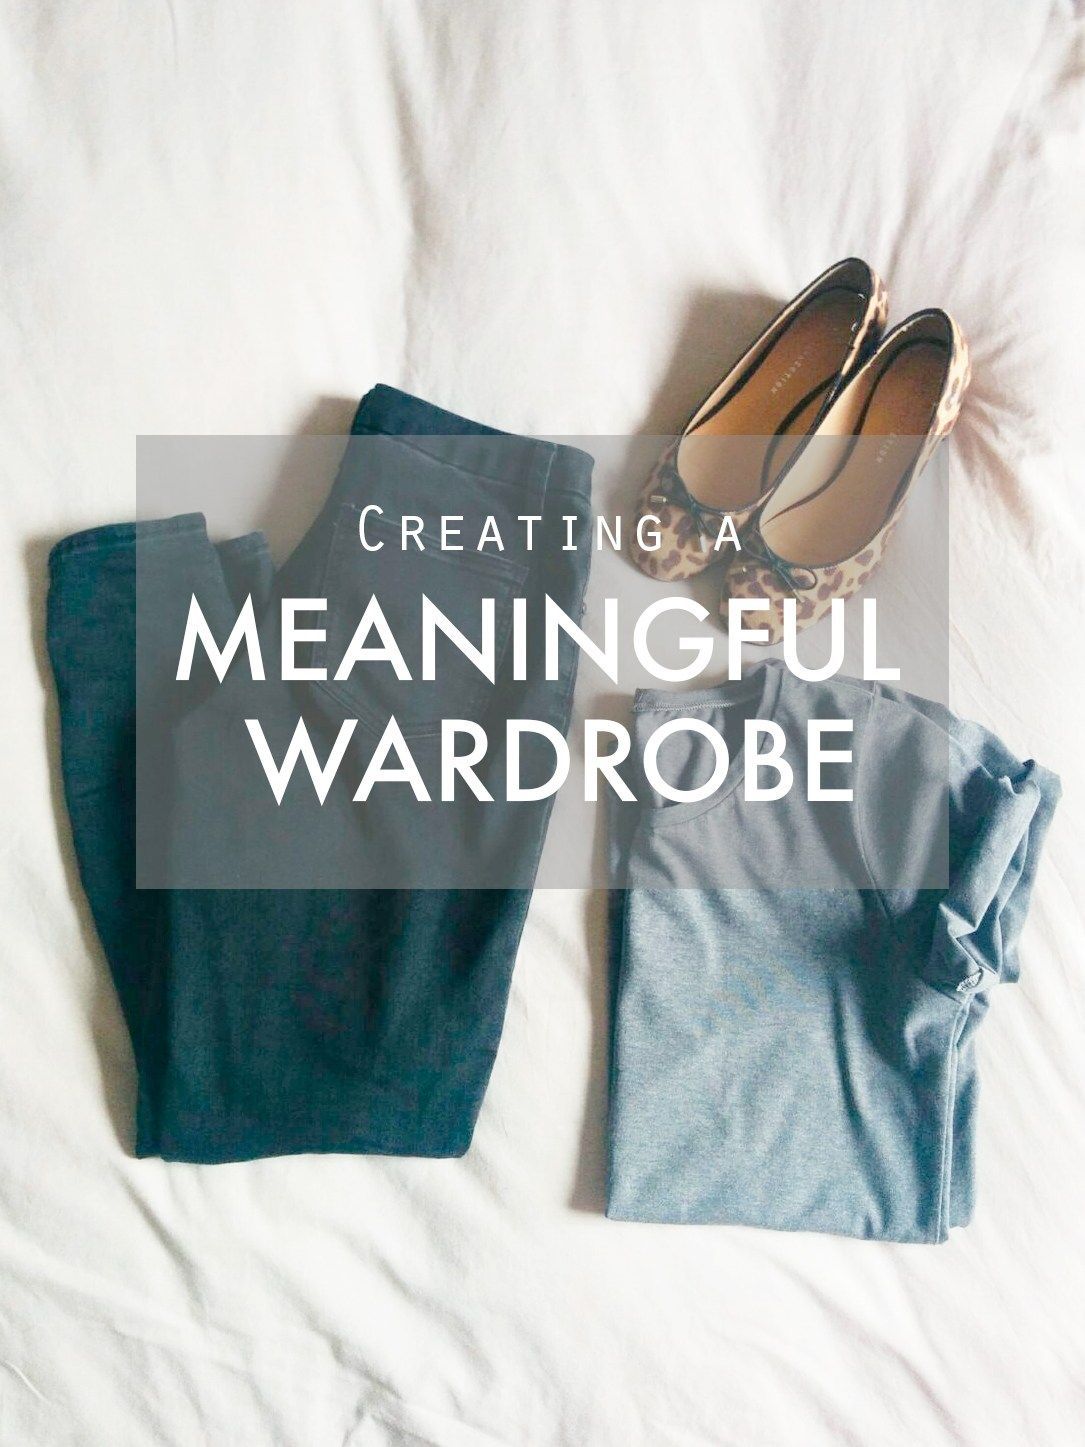 Thoughts on crafting a more meaningful wardrobe -   21 DIY Clothes Man wardrobes
 ideas